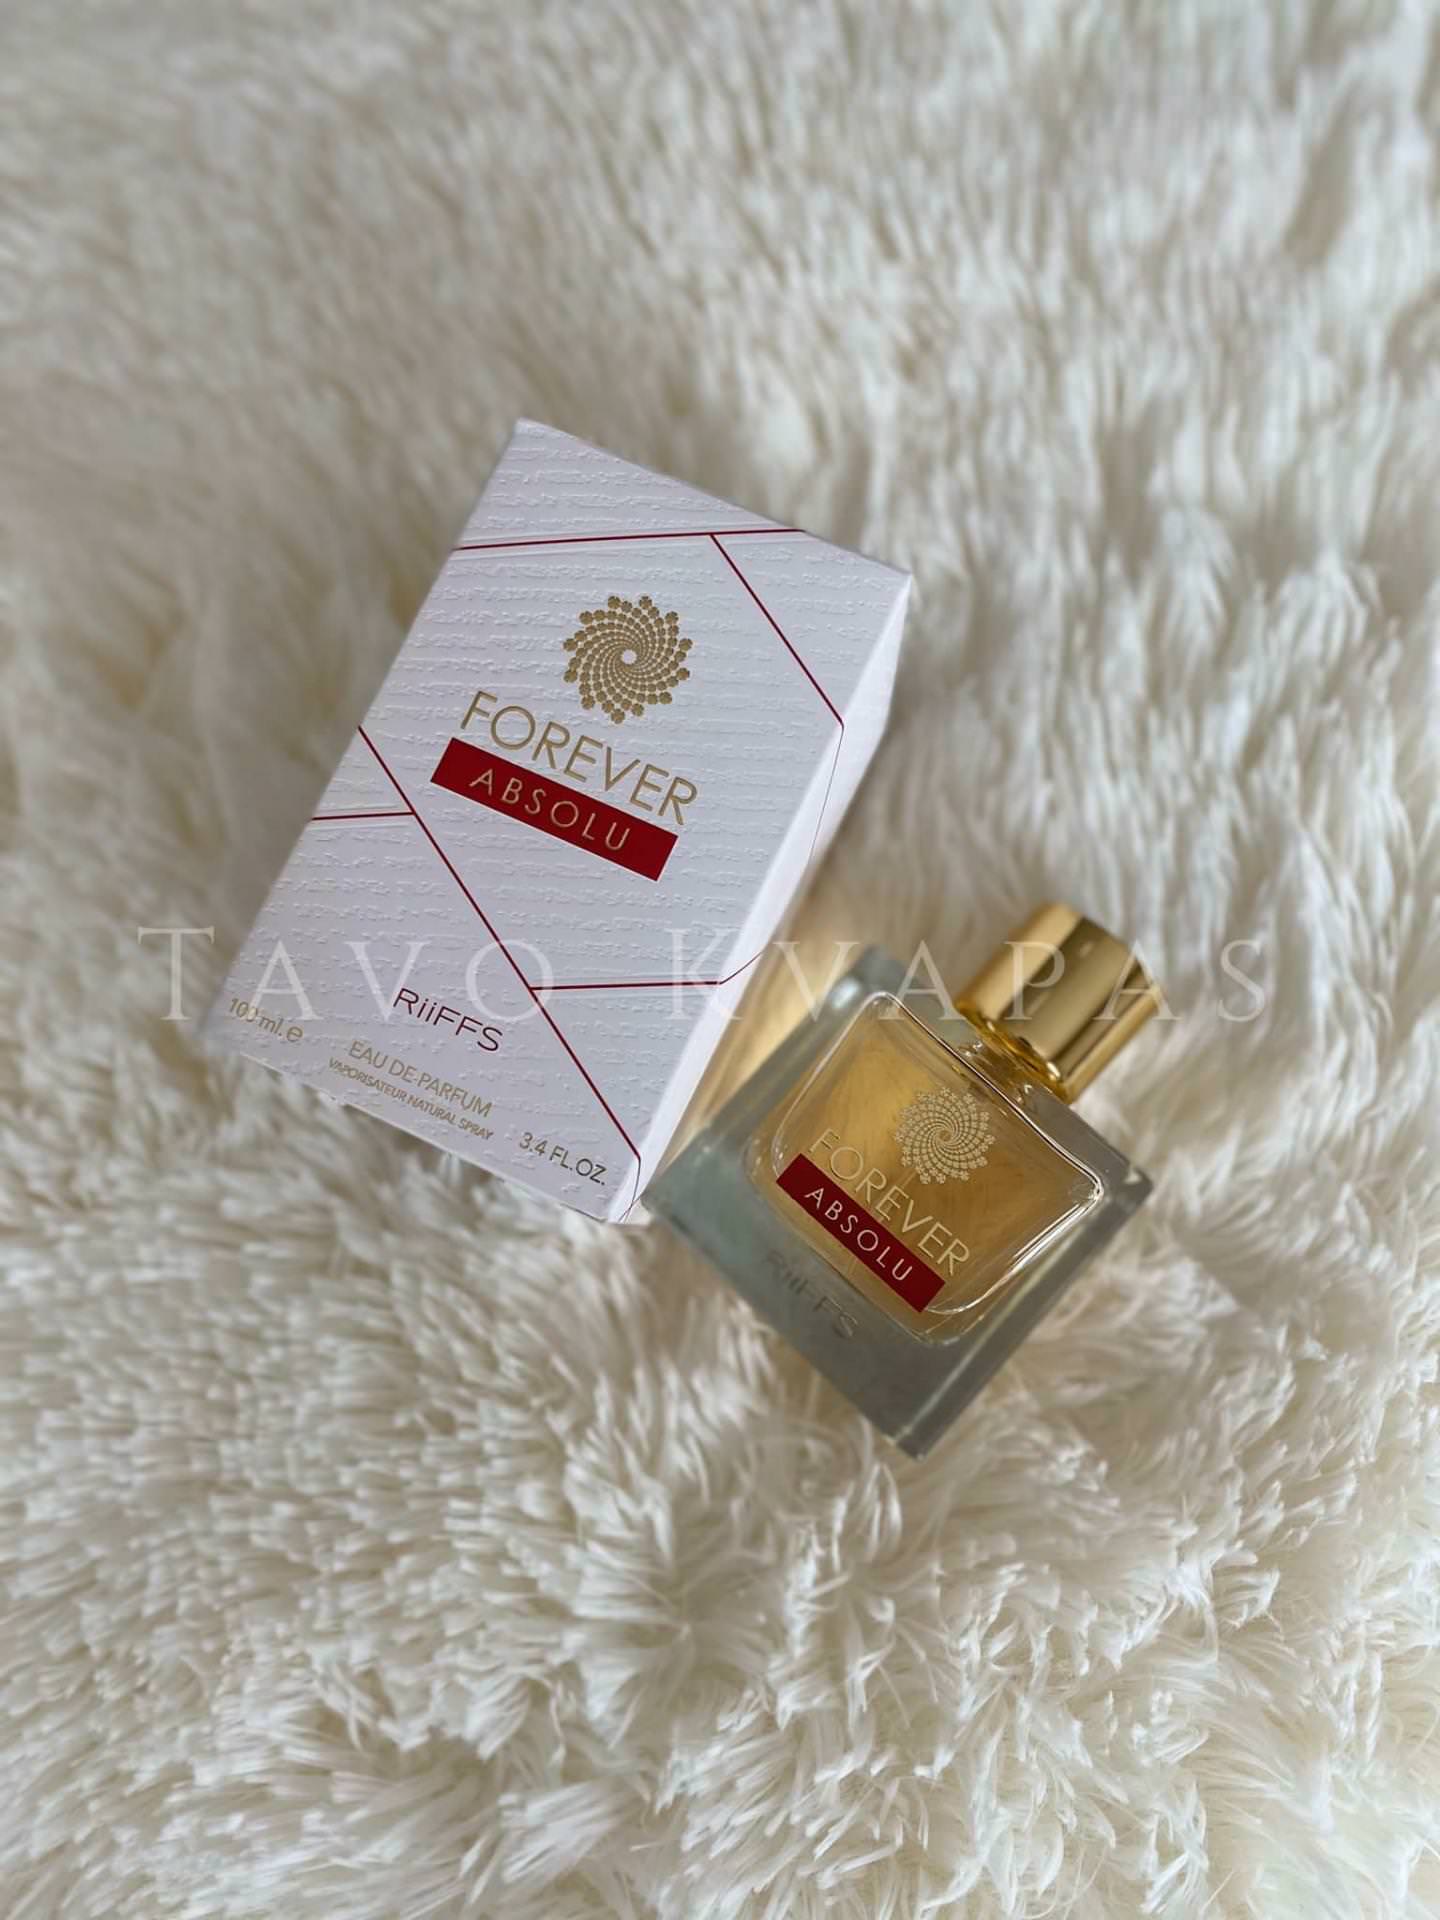 Forever Absolu- Maison Baccarat Rouge 540